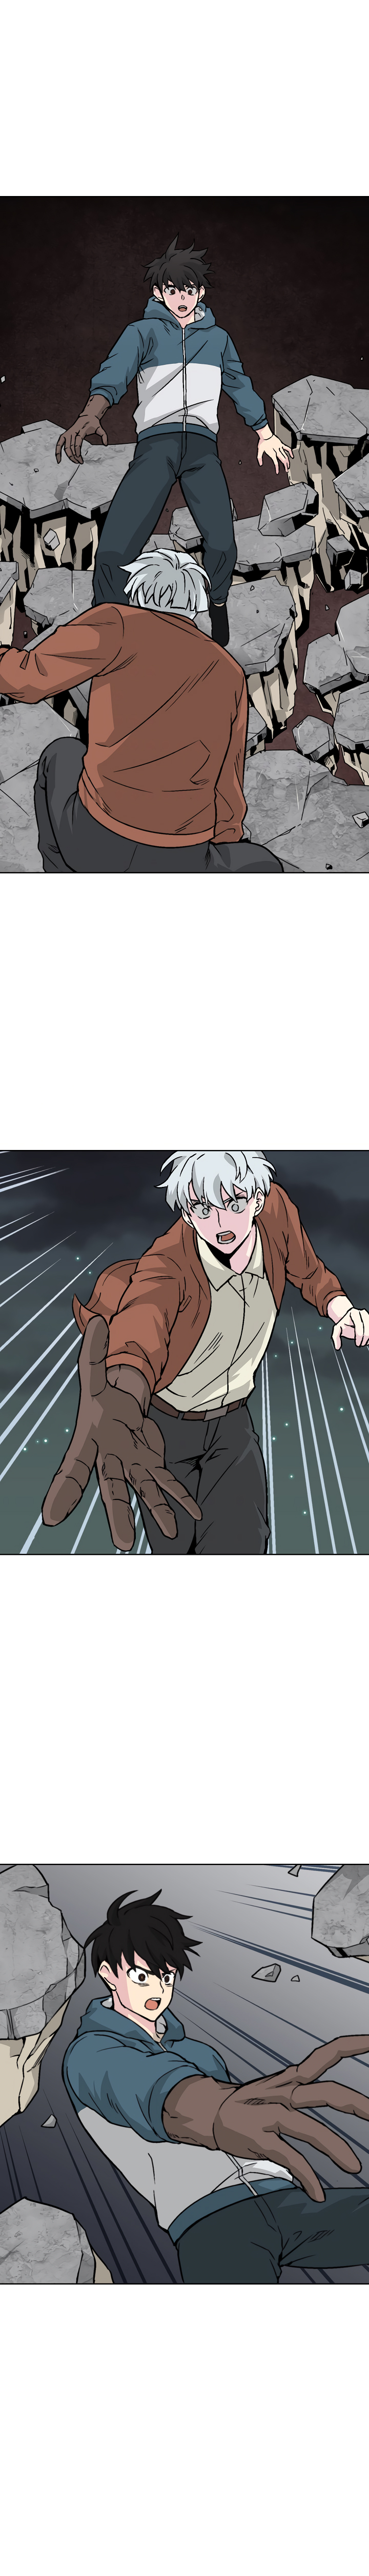 Capture the Golem and Escape Poverty Ch. 21